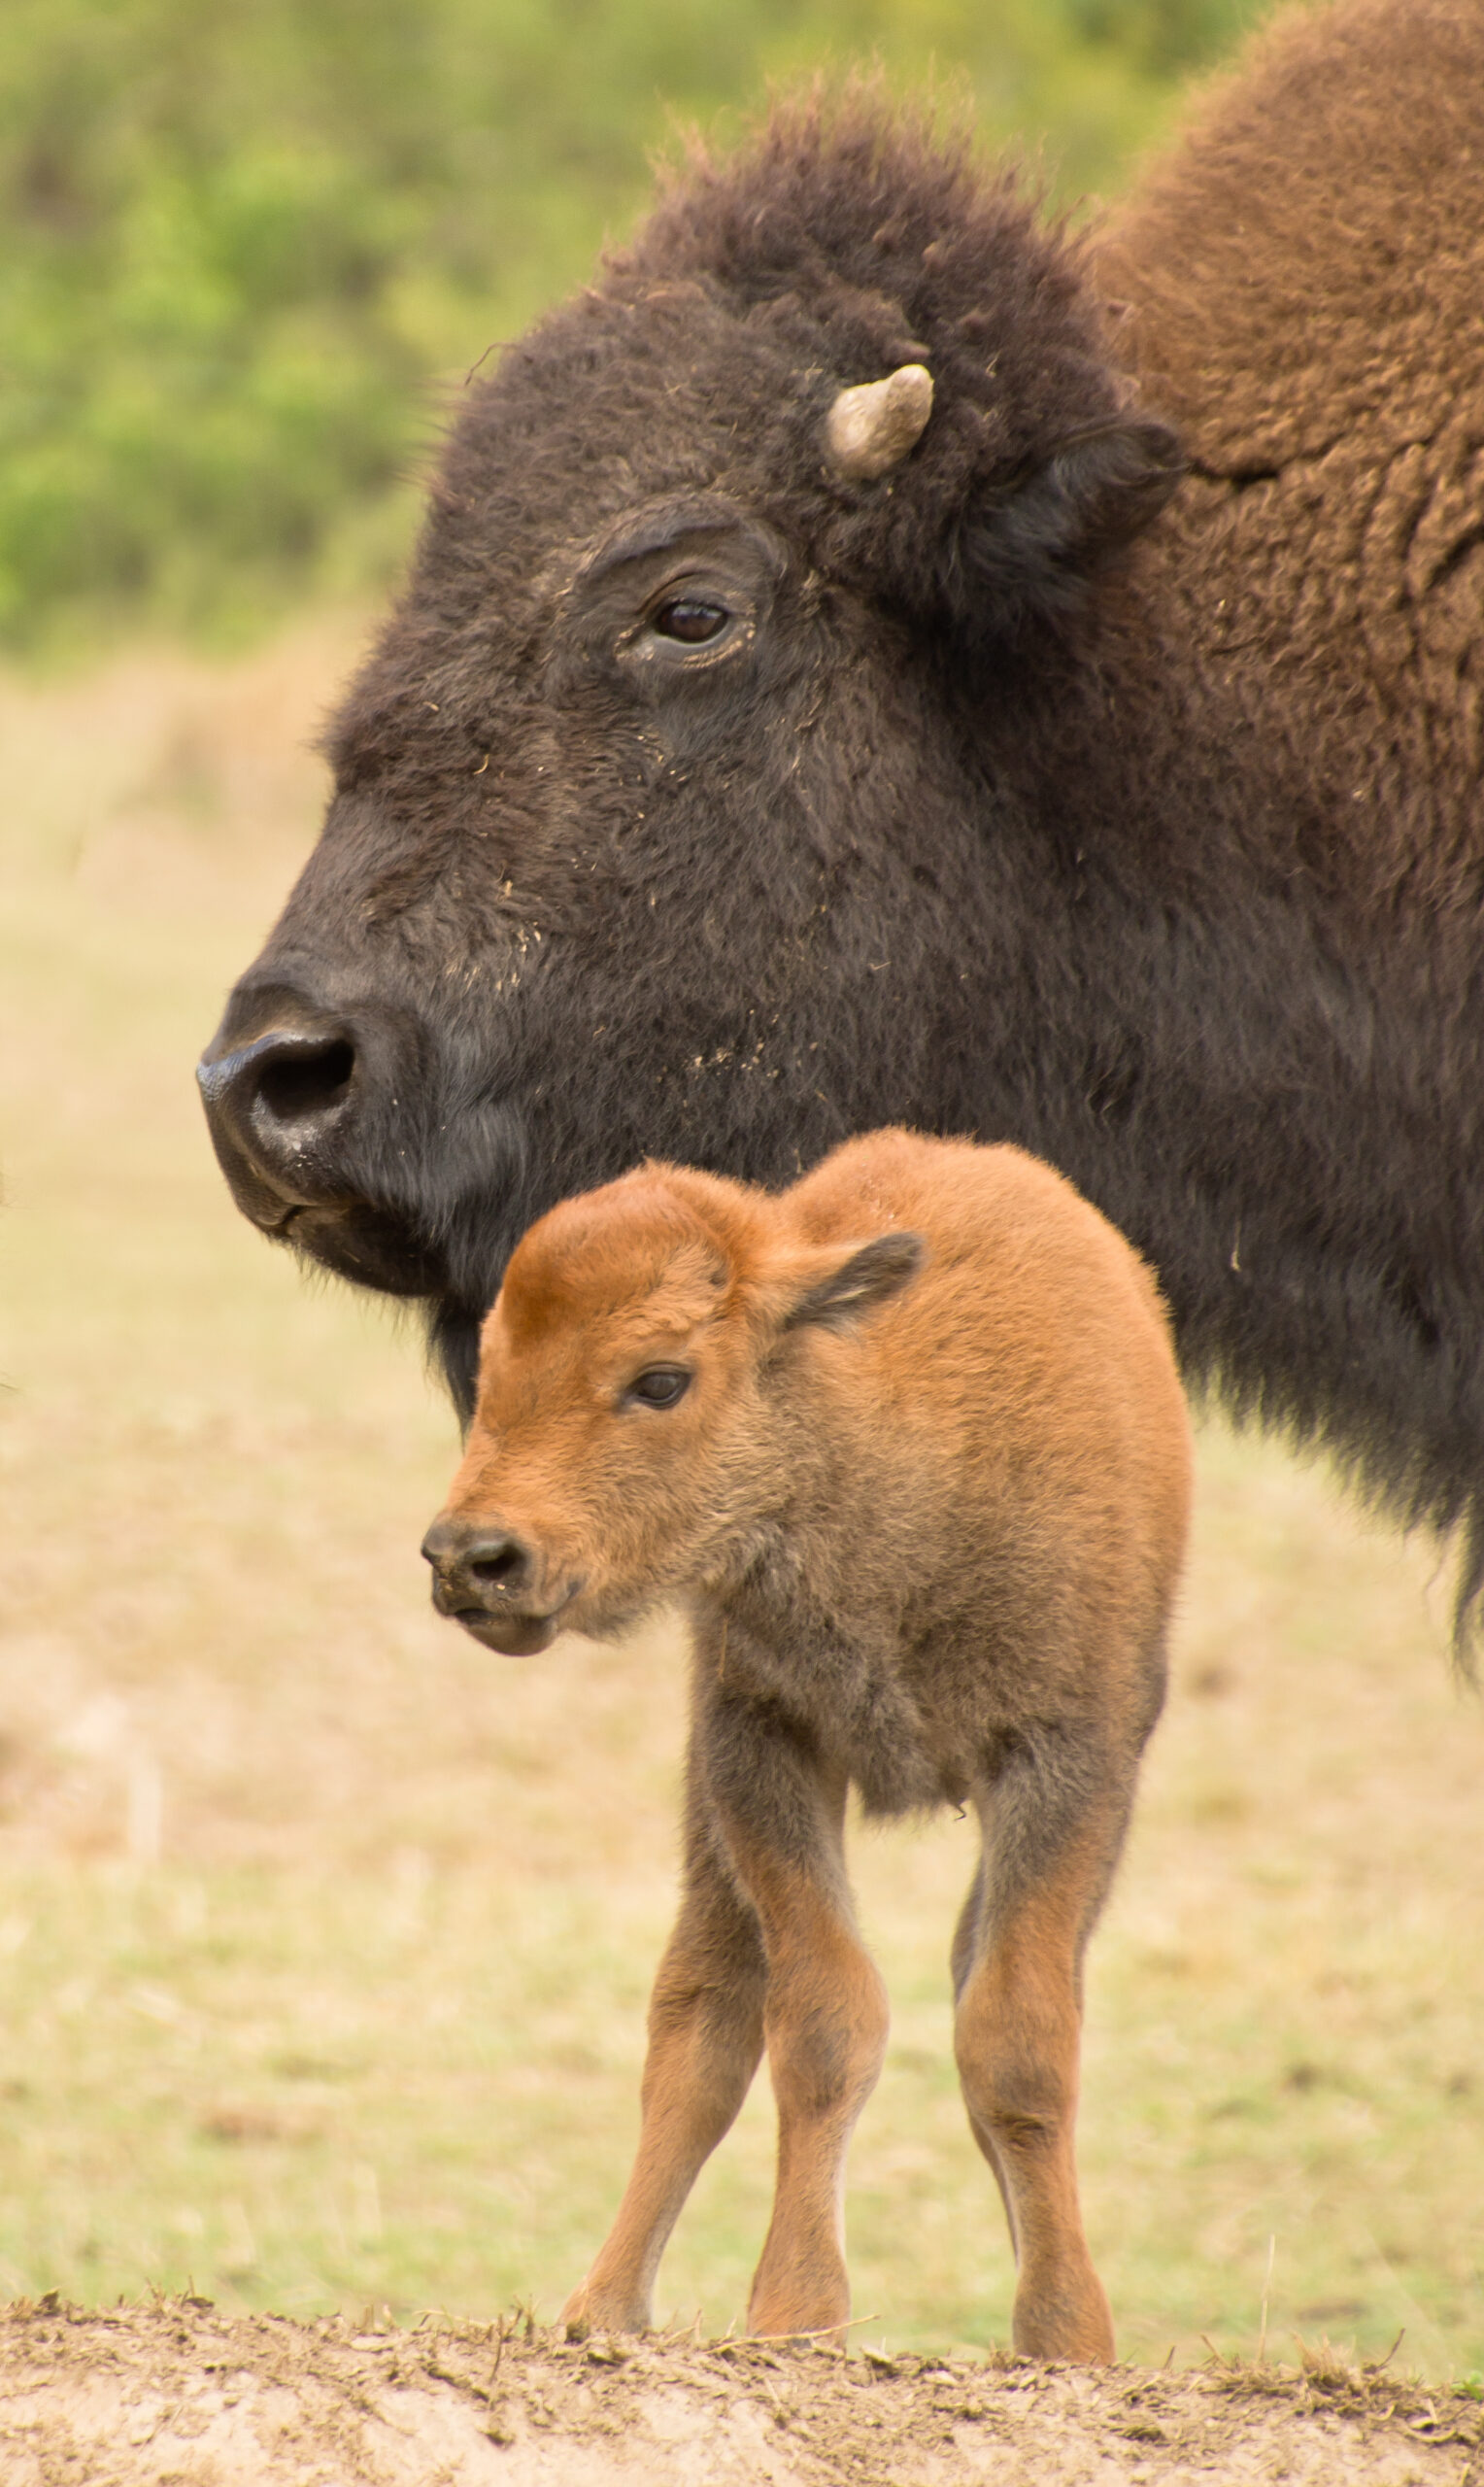 a big bison mother with her newborn calf 2022 11 11 04 51 03 utc scaled